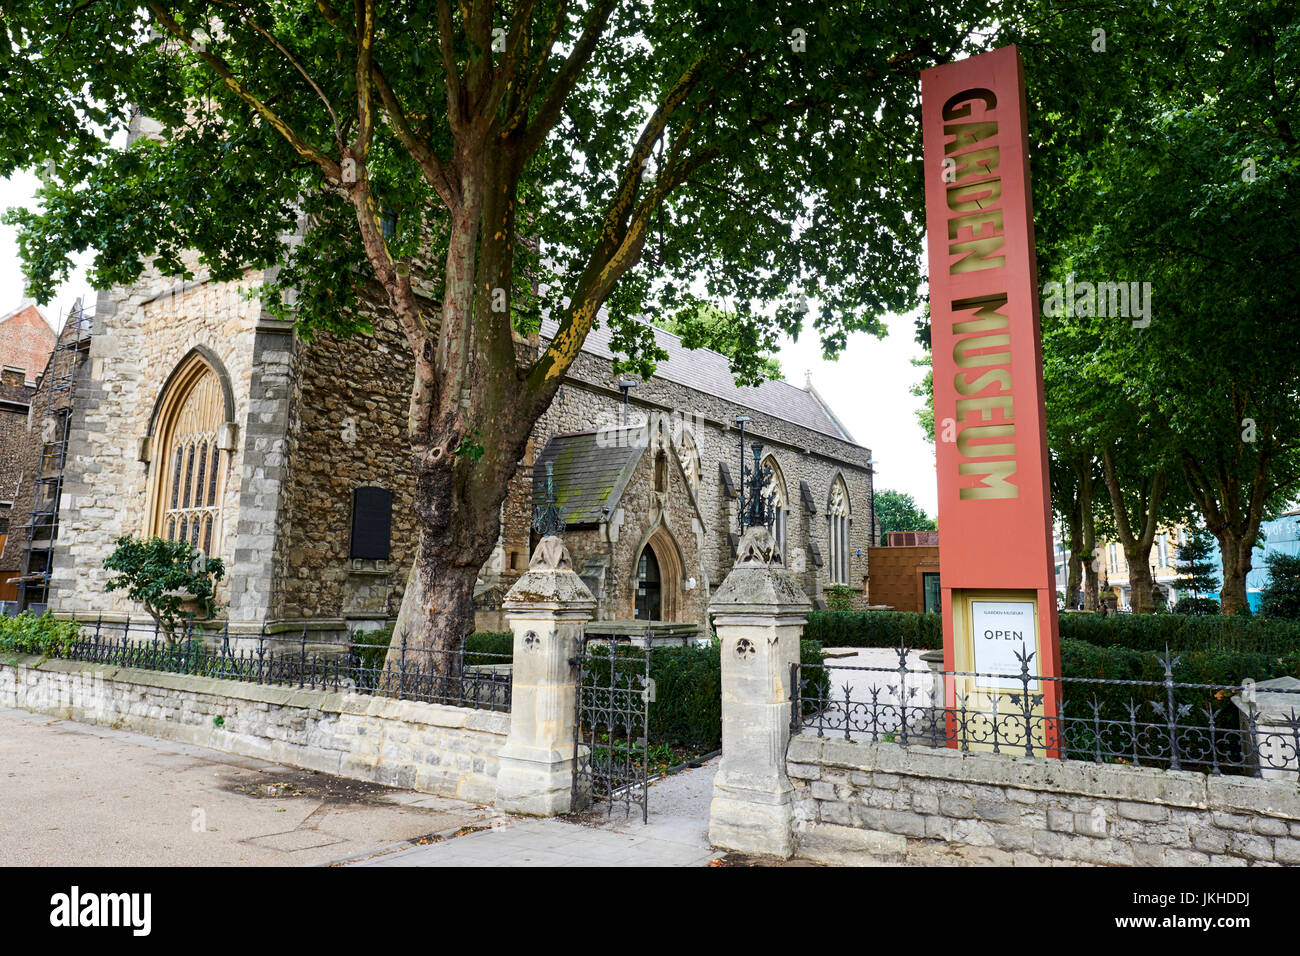 Garden Museum Founded By Rosemary Nicholson In 1977 In The Abandoned Church Of St Marys, Lambeth Palace Road, London, UK Stock Photo